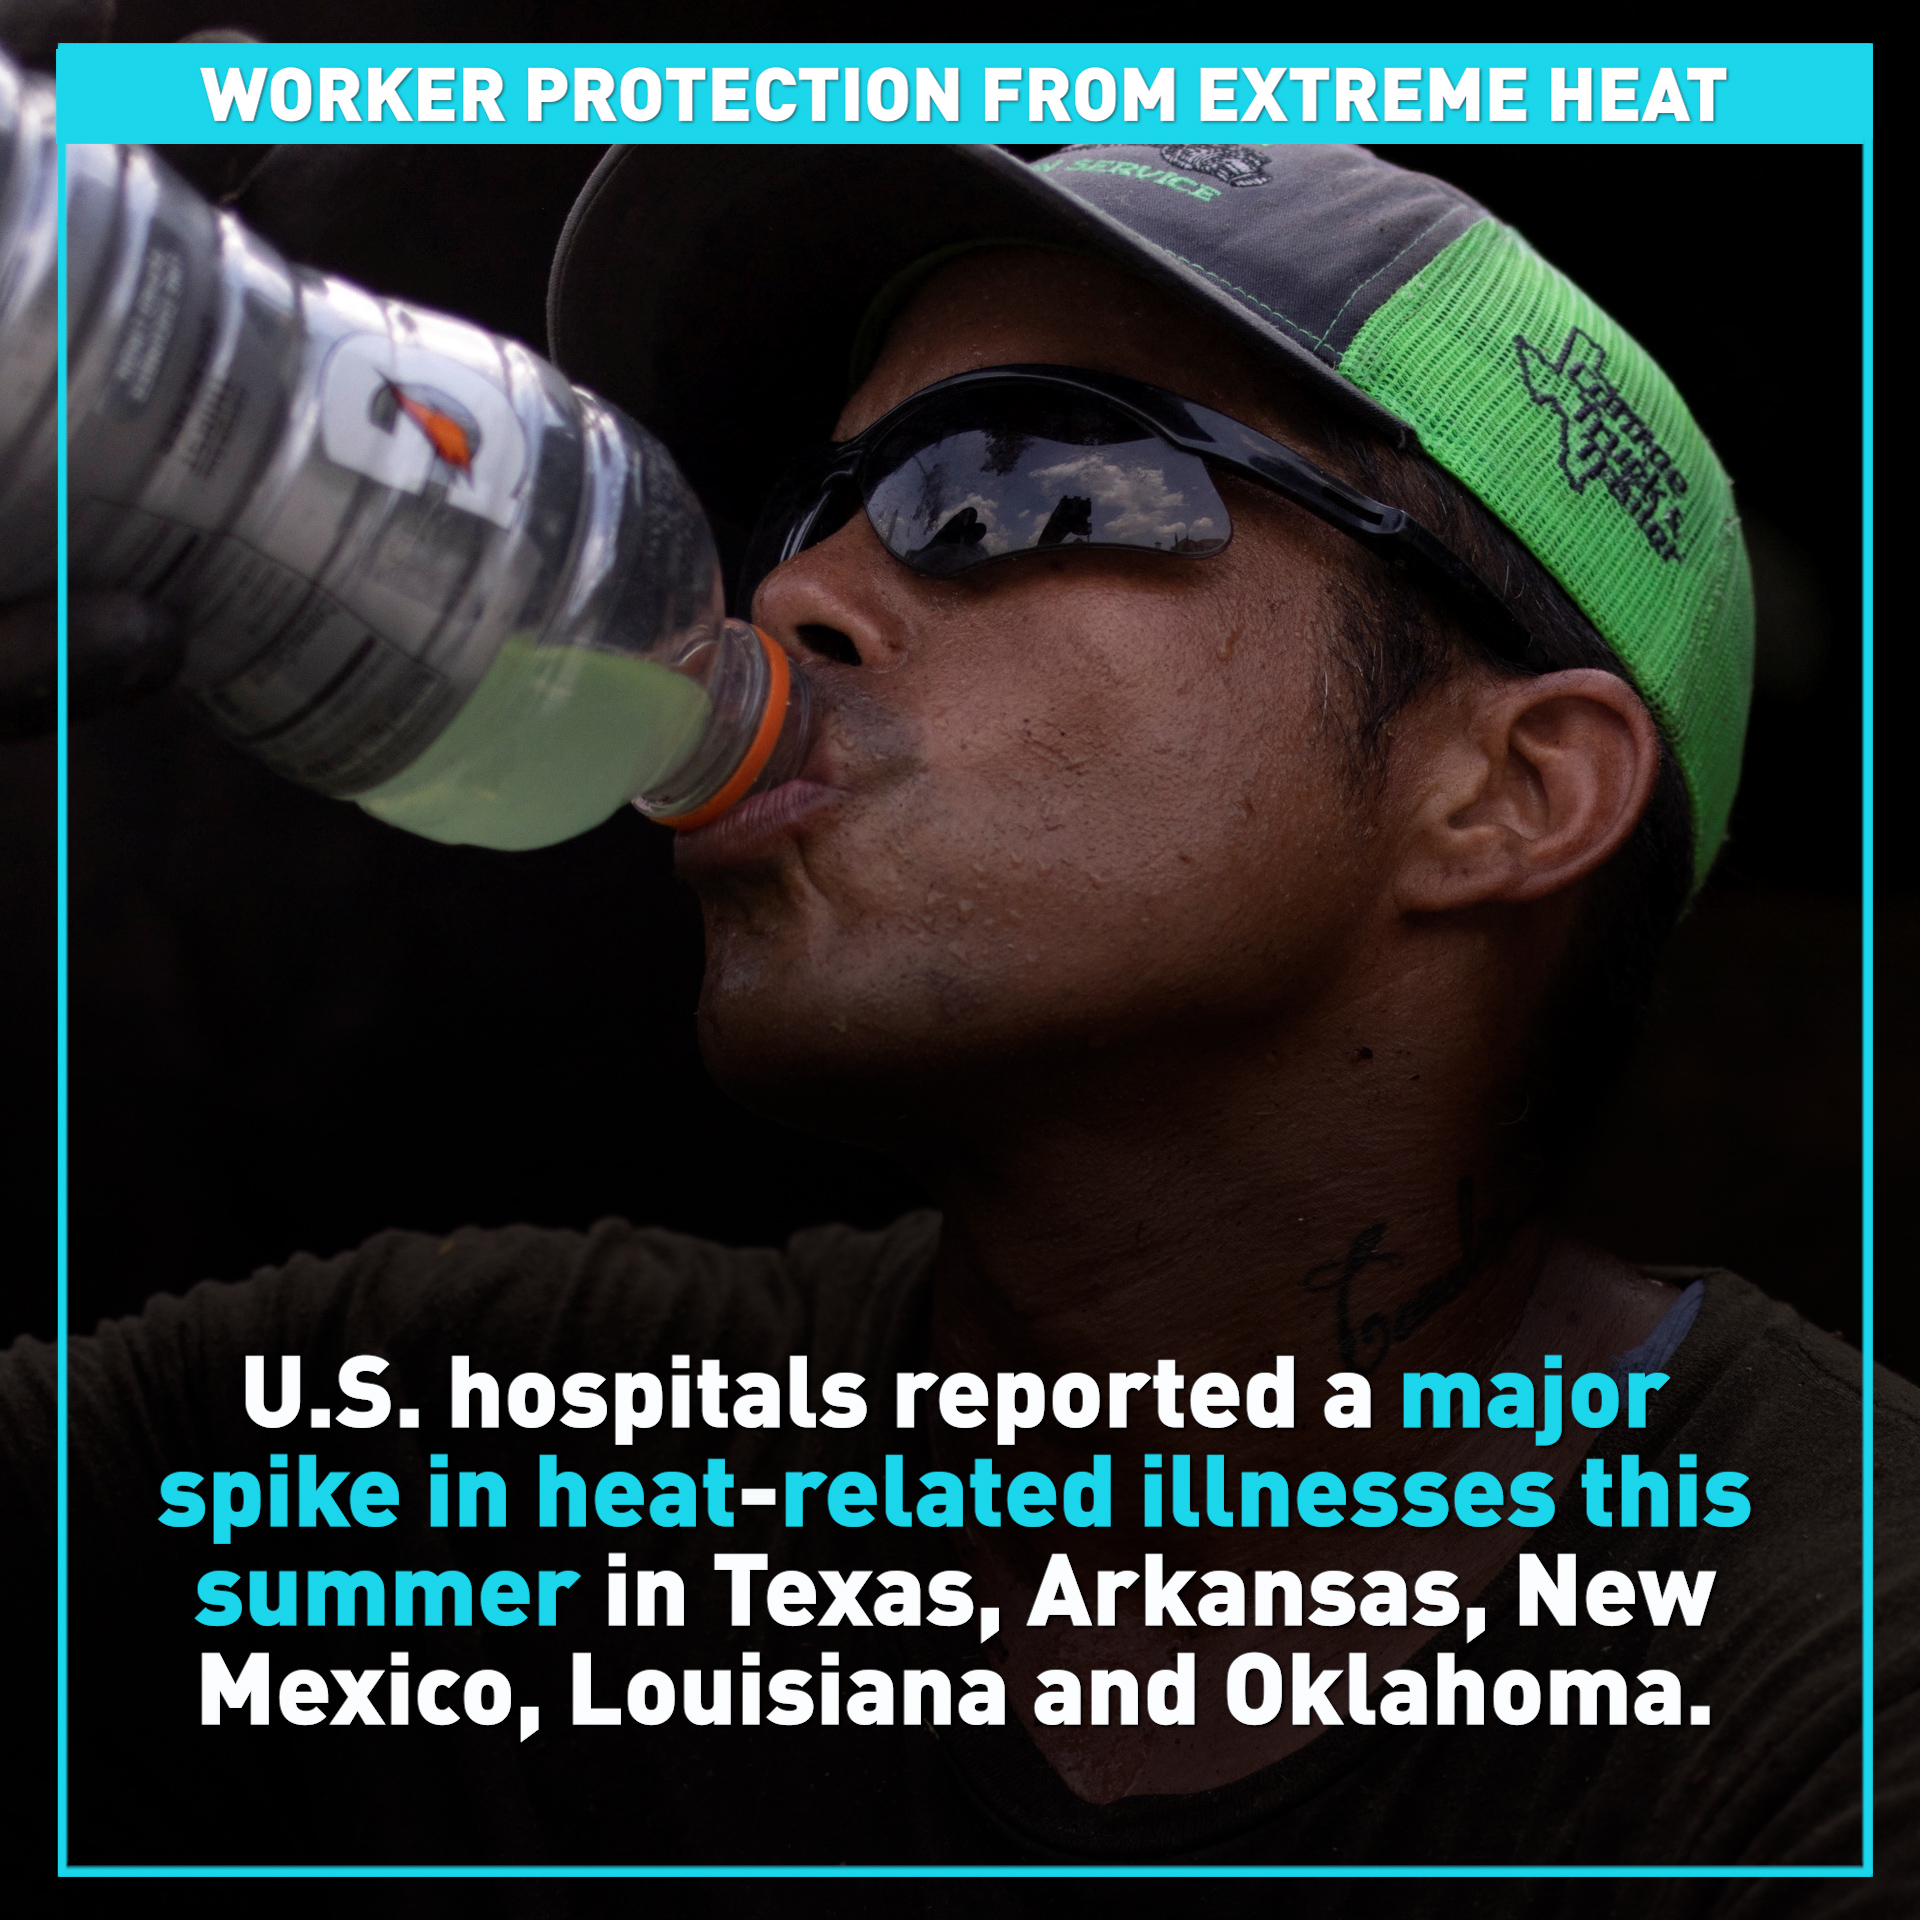 Biden administration pushes to protect workers from extreme heat events